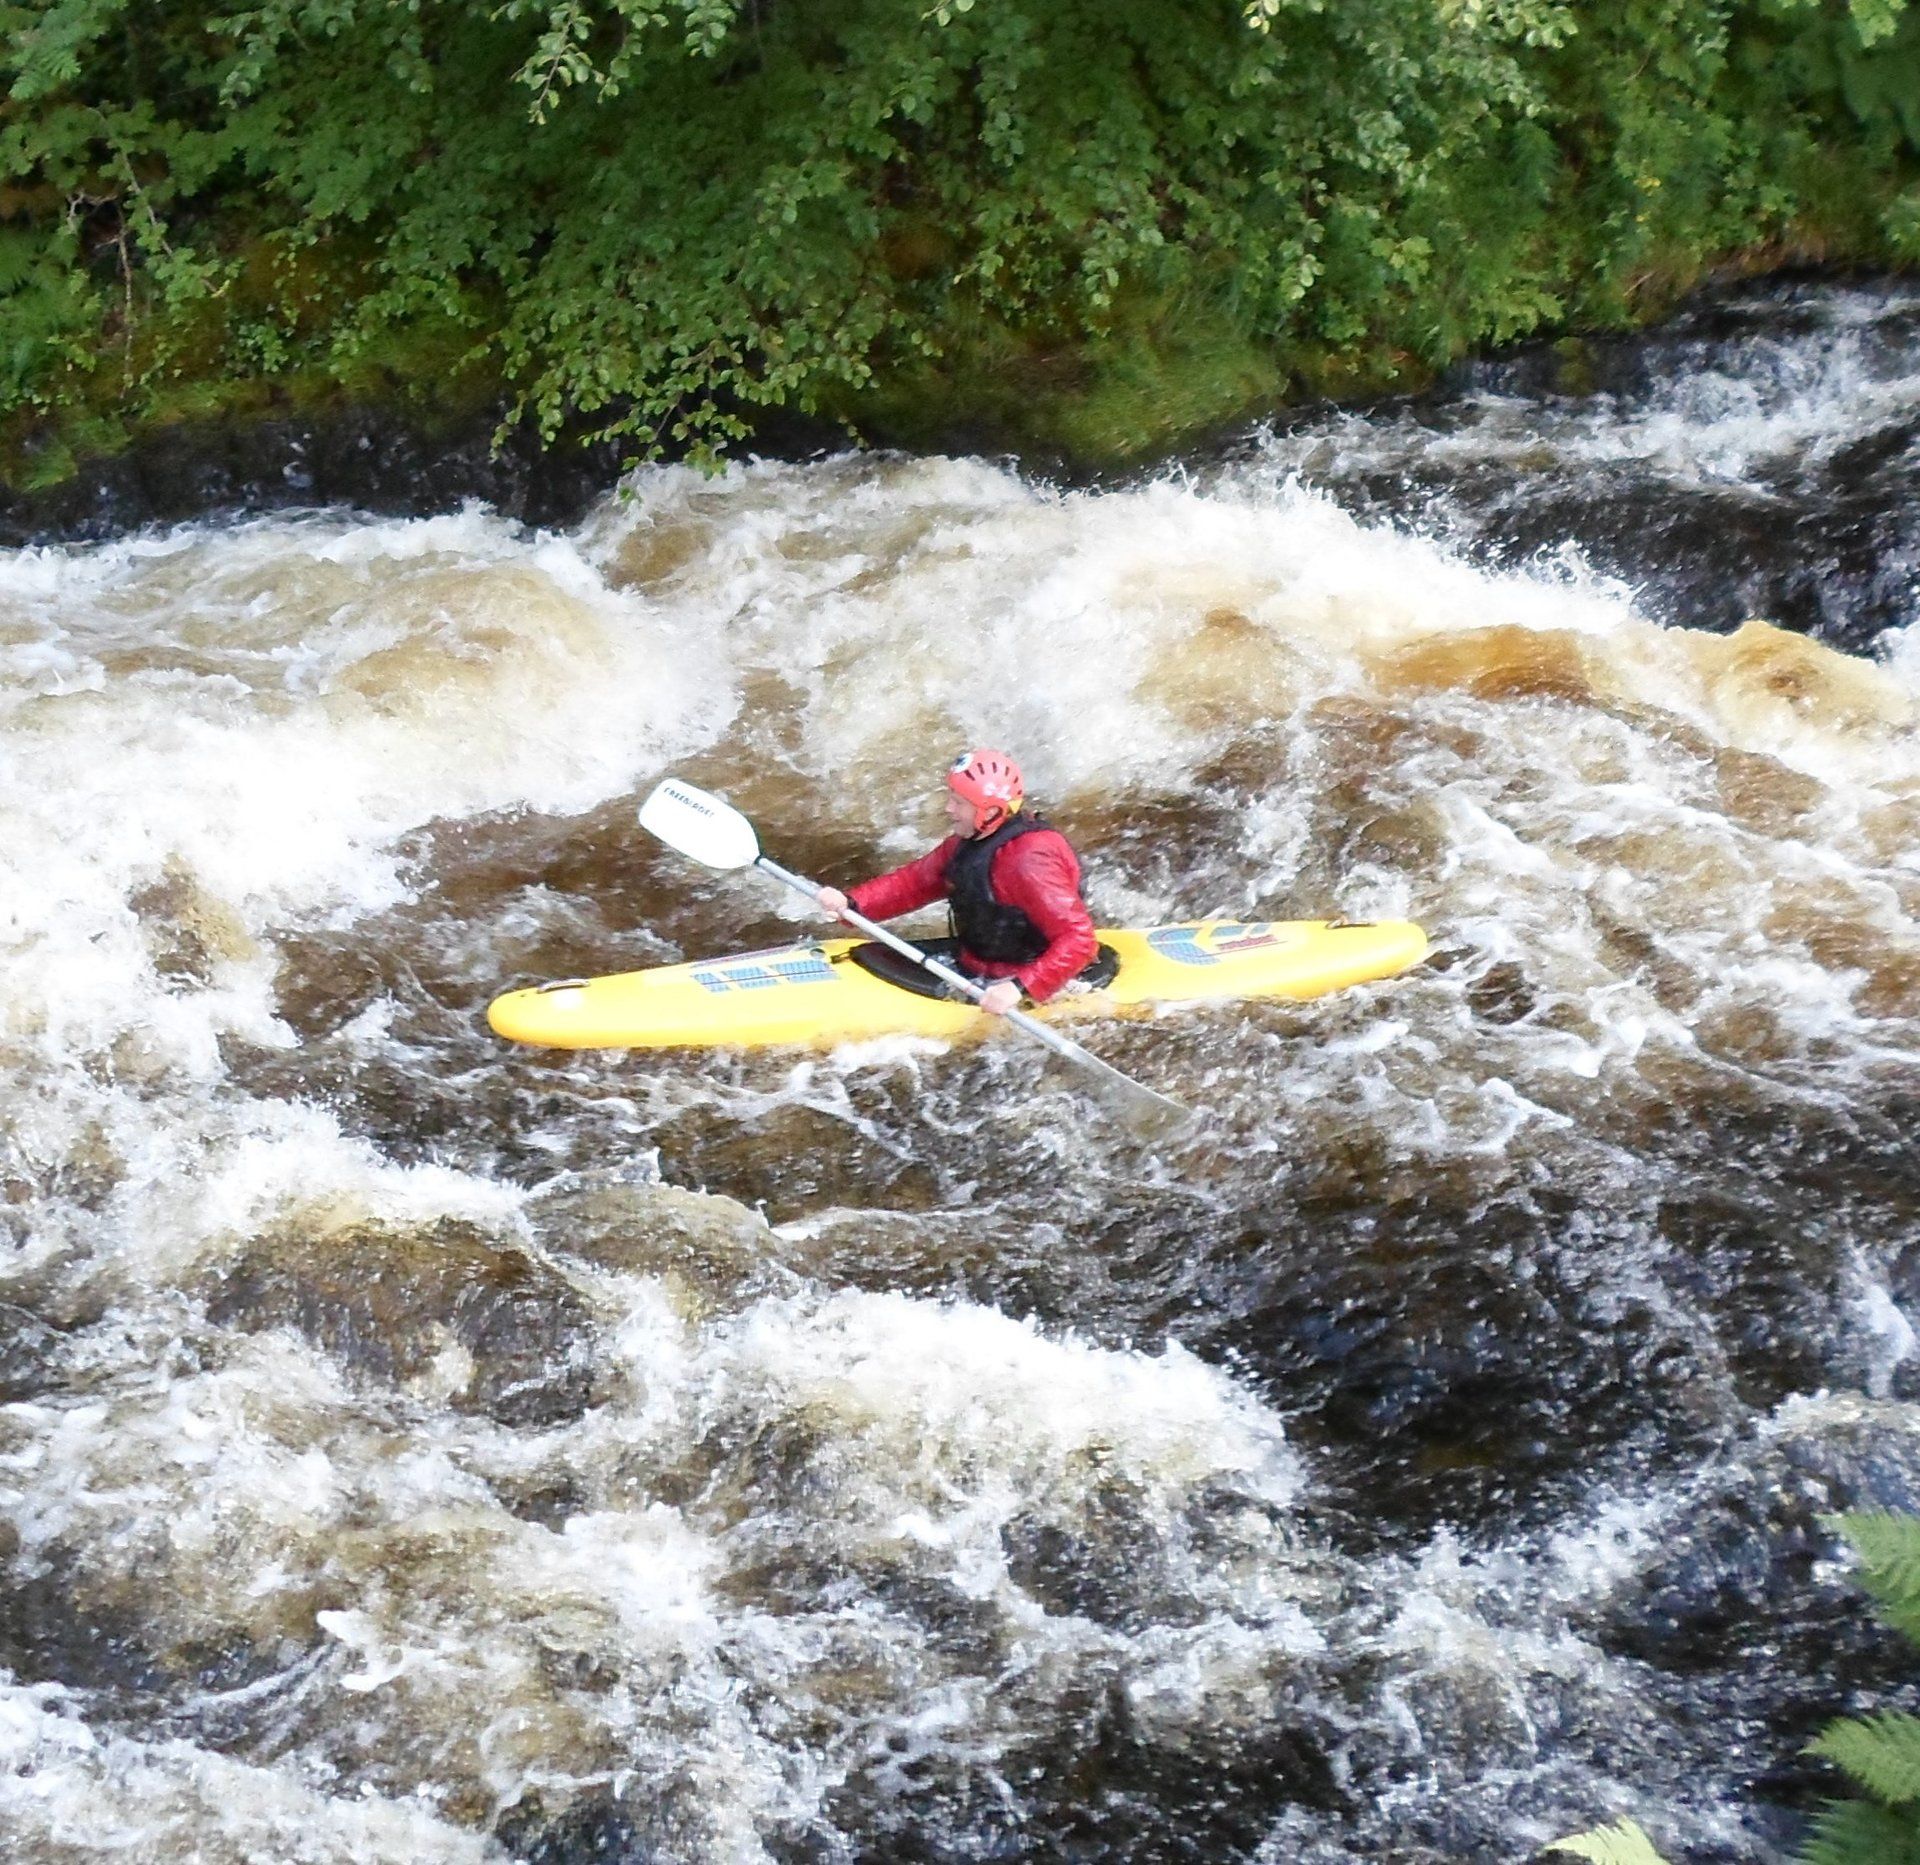 Whitewater kayaking on the river